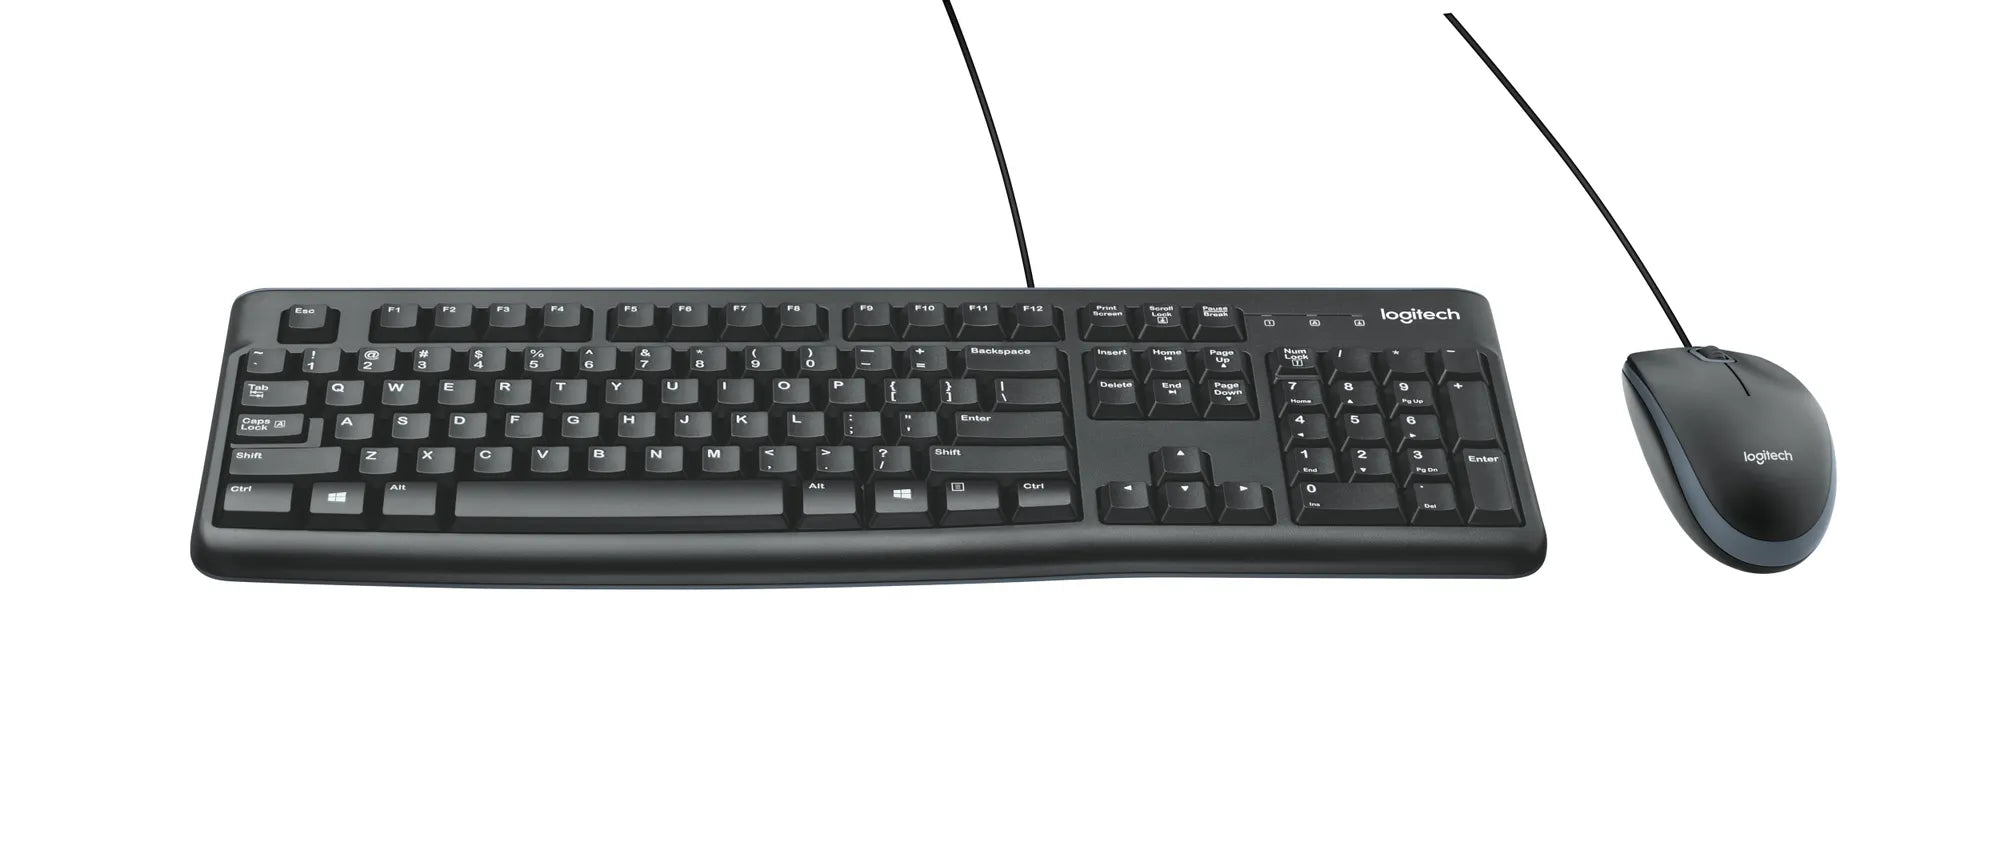 Logitech-Corded-Keyboard-and-Mouse-Combo-MK120-Comfortable-quiet-typing-spill-resistant-design-high-definition-optical-mouse-wit